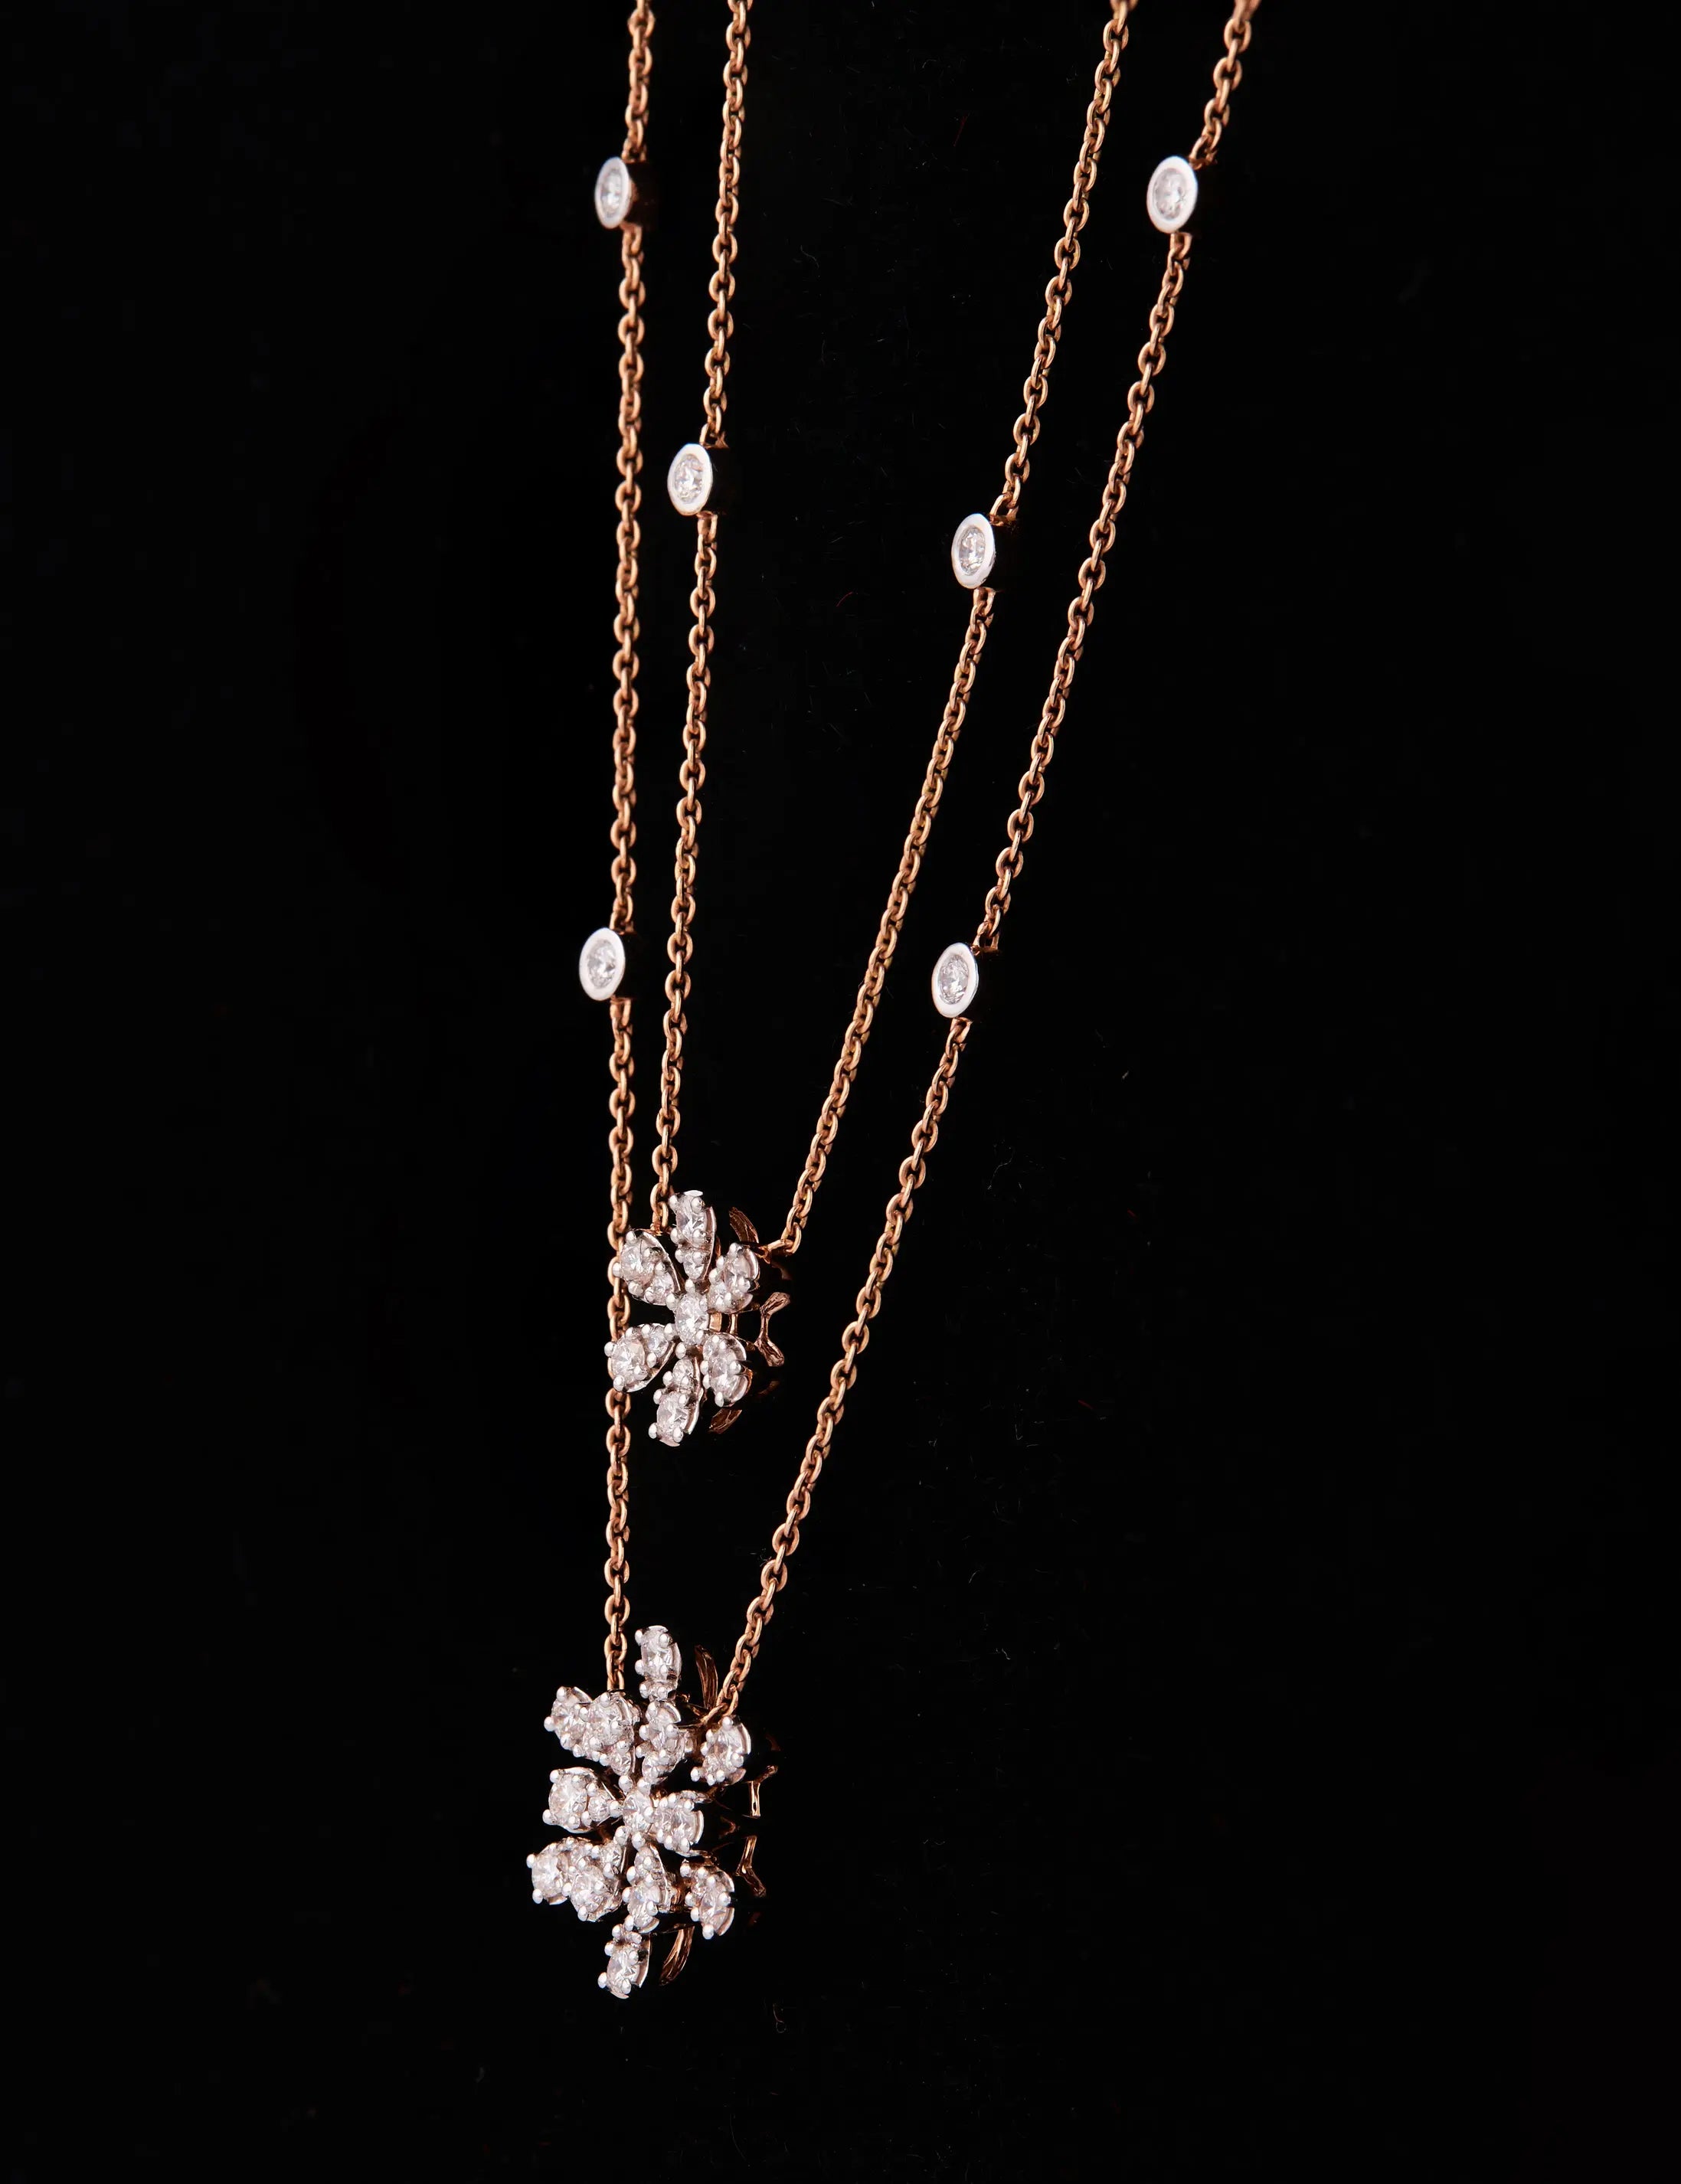 Floral Necklace chain